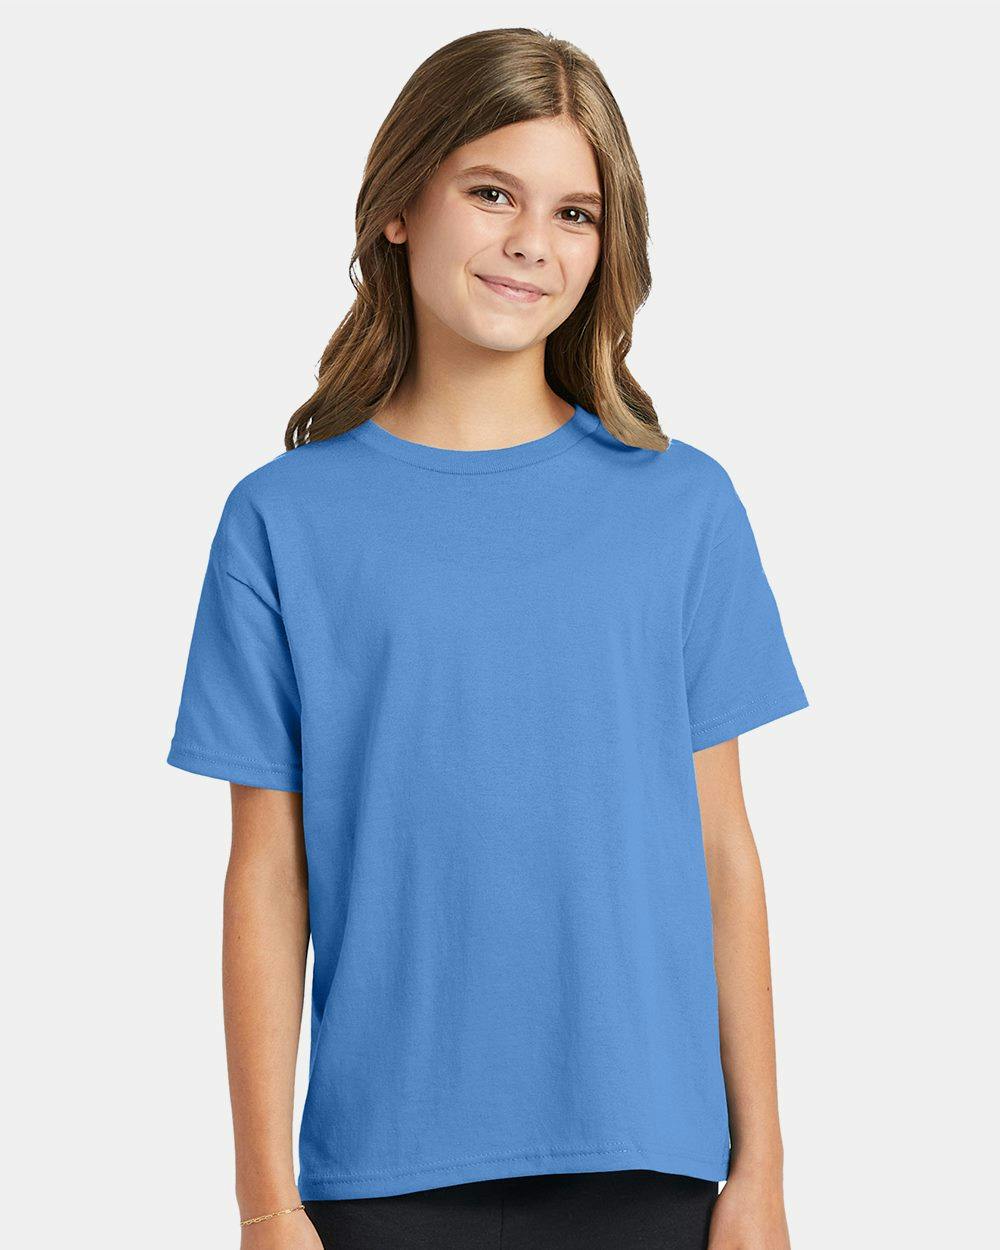 Image for Ecosmart™ Youth T-Shirt - 5370